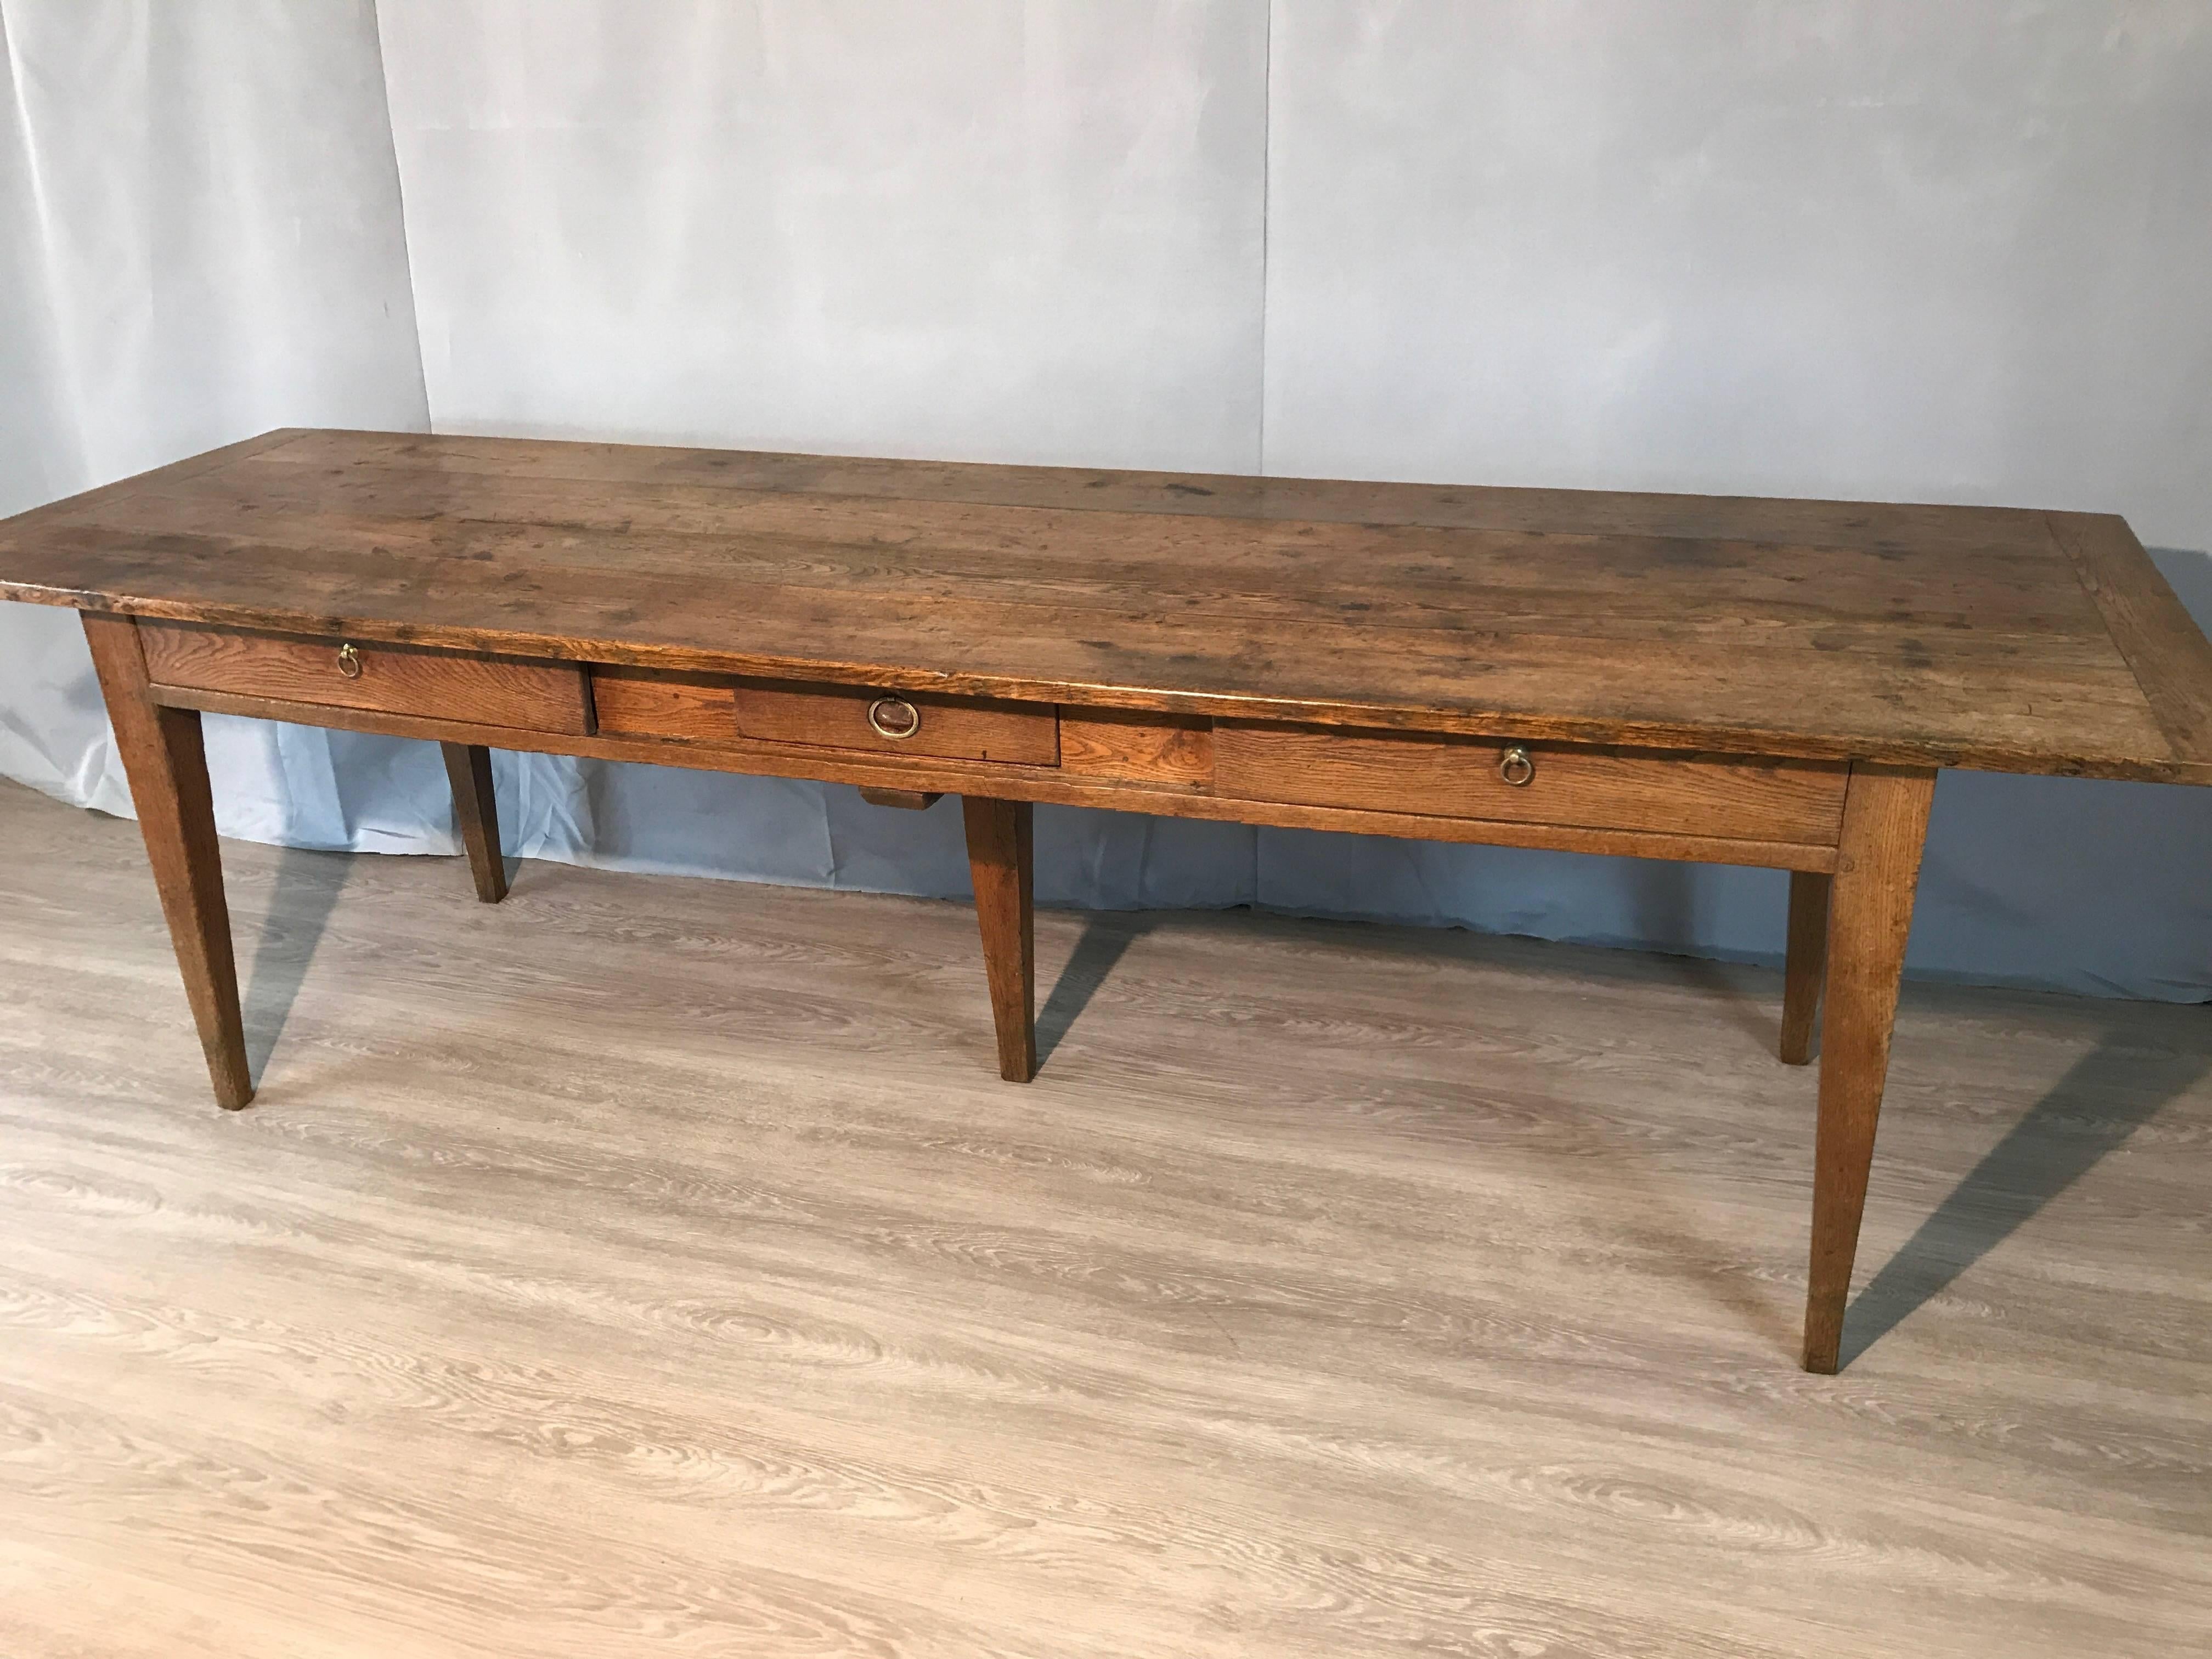 Hand-Crafted Antique Oak Serving Table